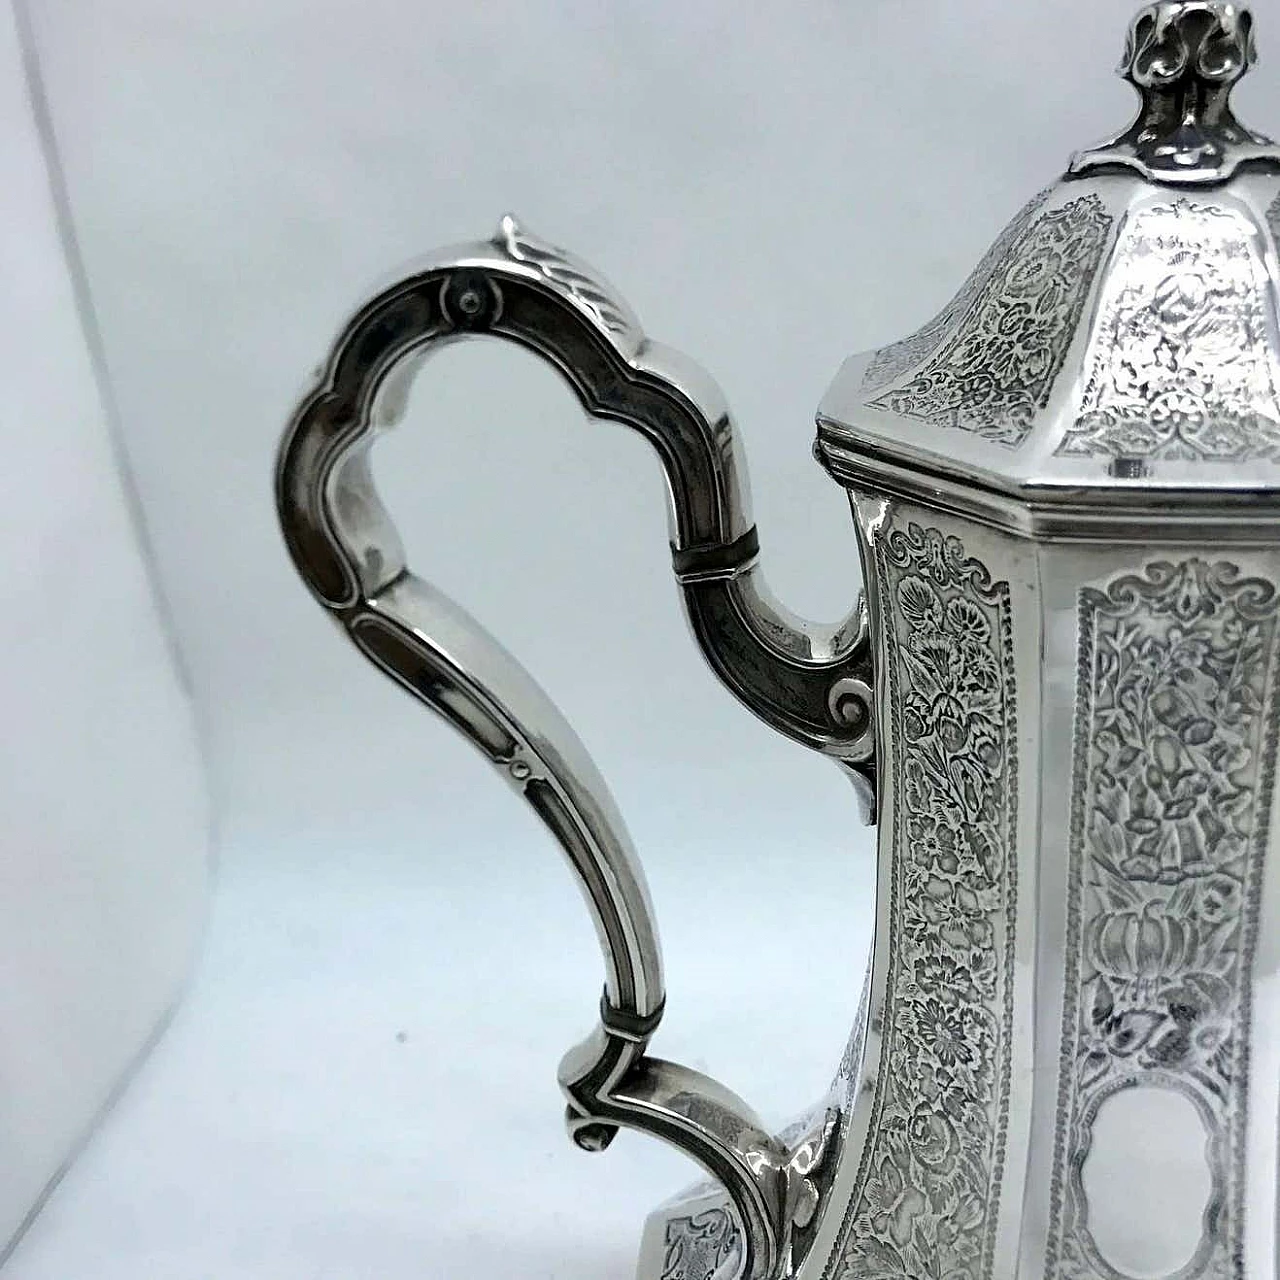 Art Nouveau tea service in engraved silver plated by Skinner & Co, 19th century 1344364